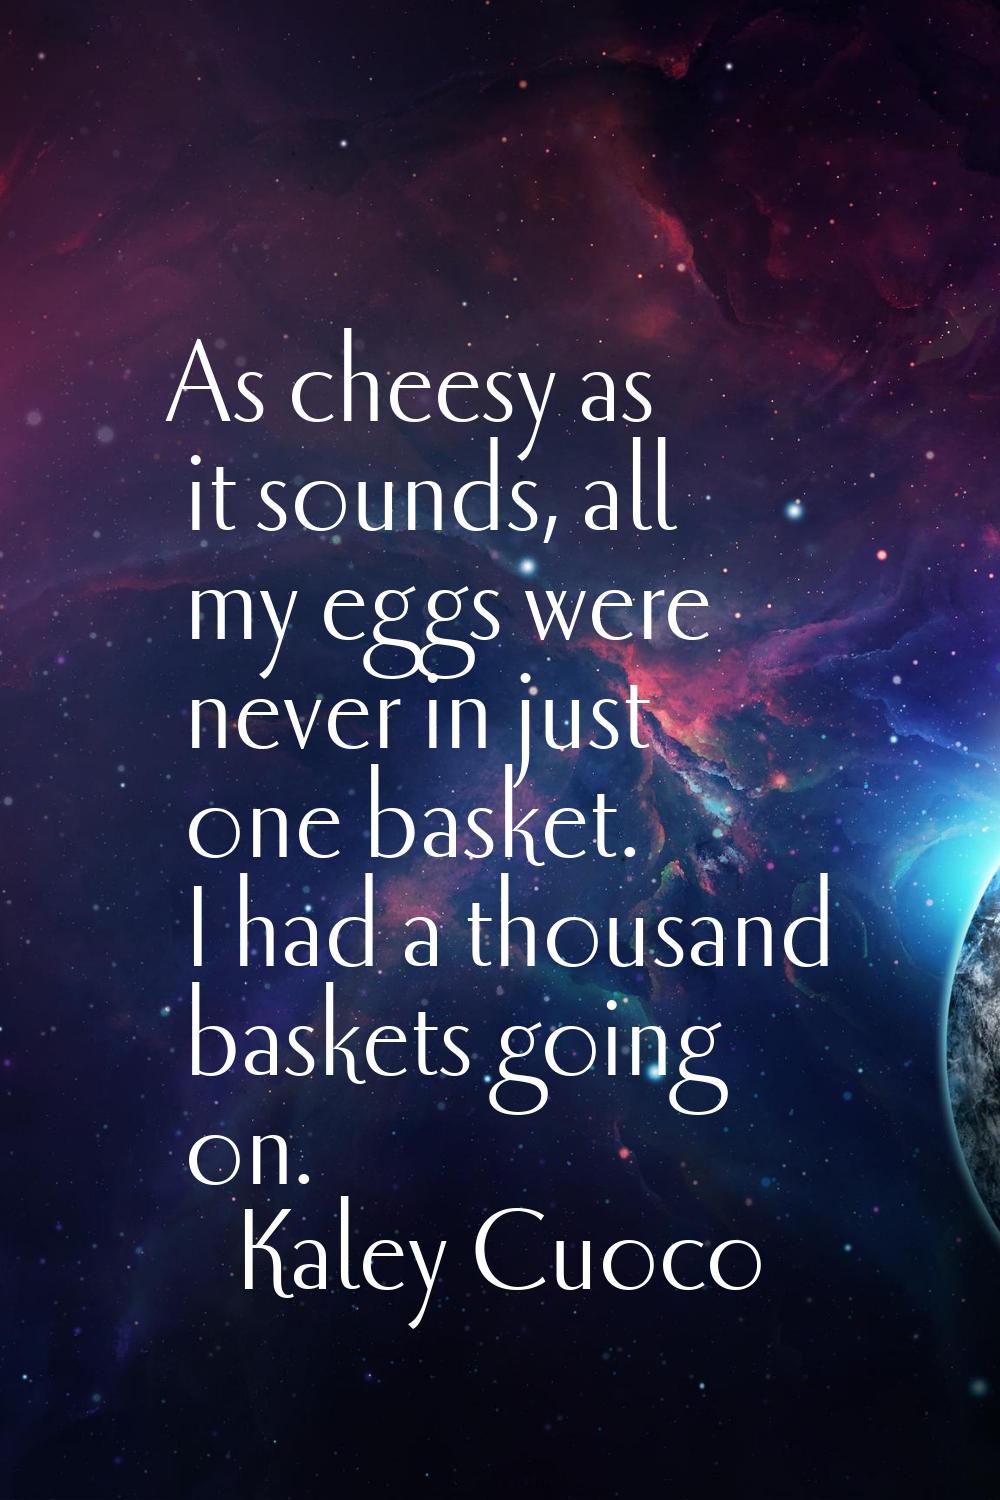 As cheesy as it sounds, all my eggs were never in just one basket. I had a thousand baskets going o